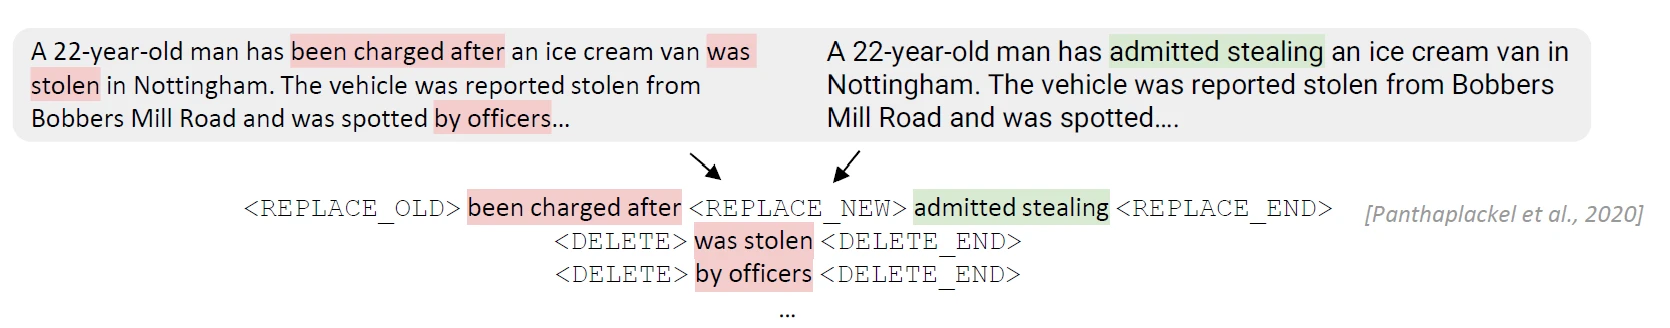 Illustration of a headline “Man charged with theft of ice cream van in Nottingham” changing to “Man admits theft of ice cream van in Nottingham” when the article’s text changed from “has been charged” to “has admitted stealing.”